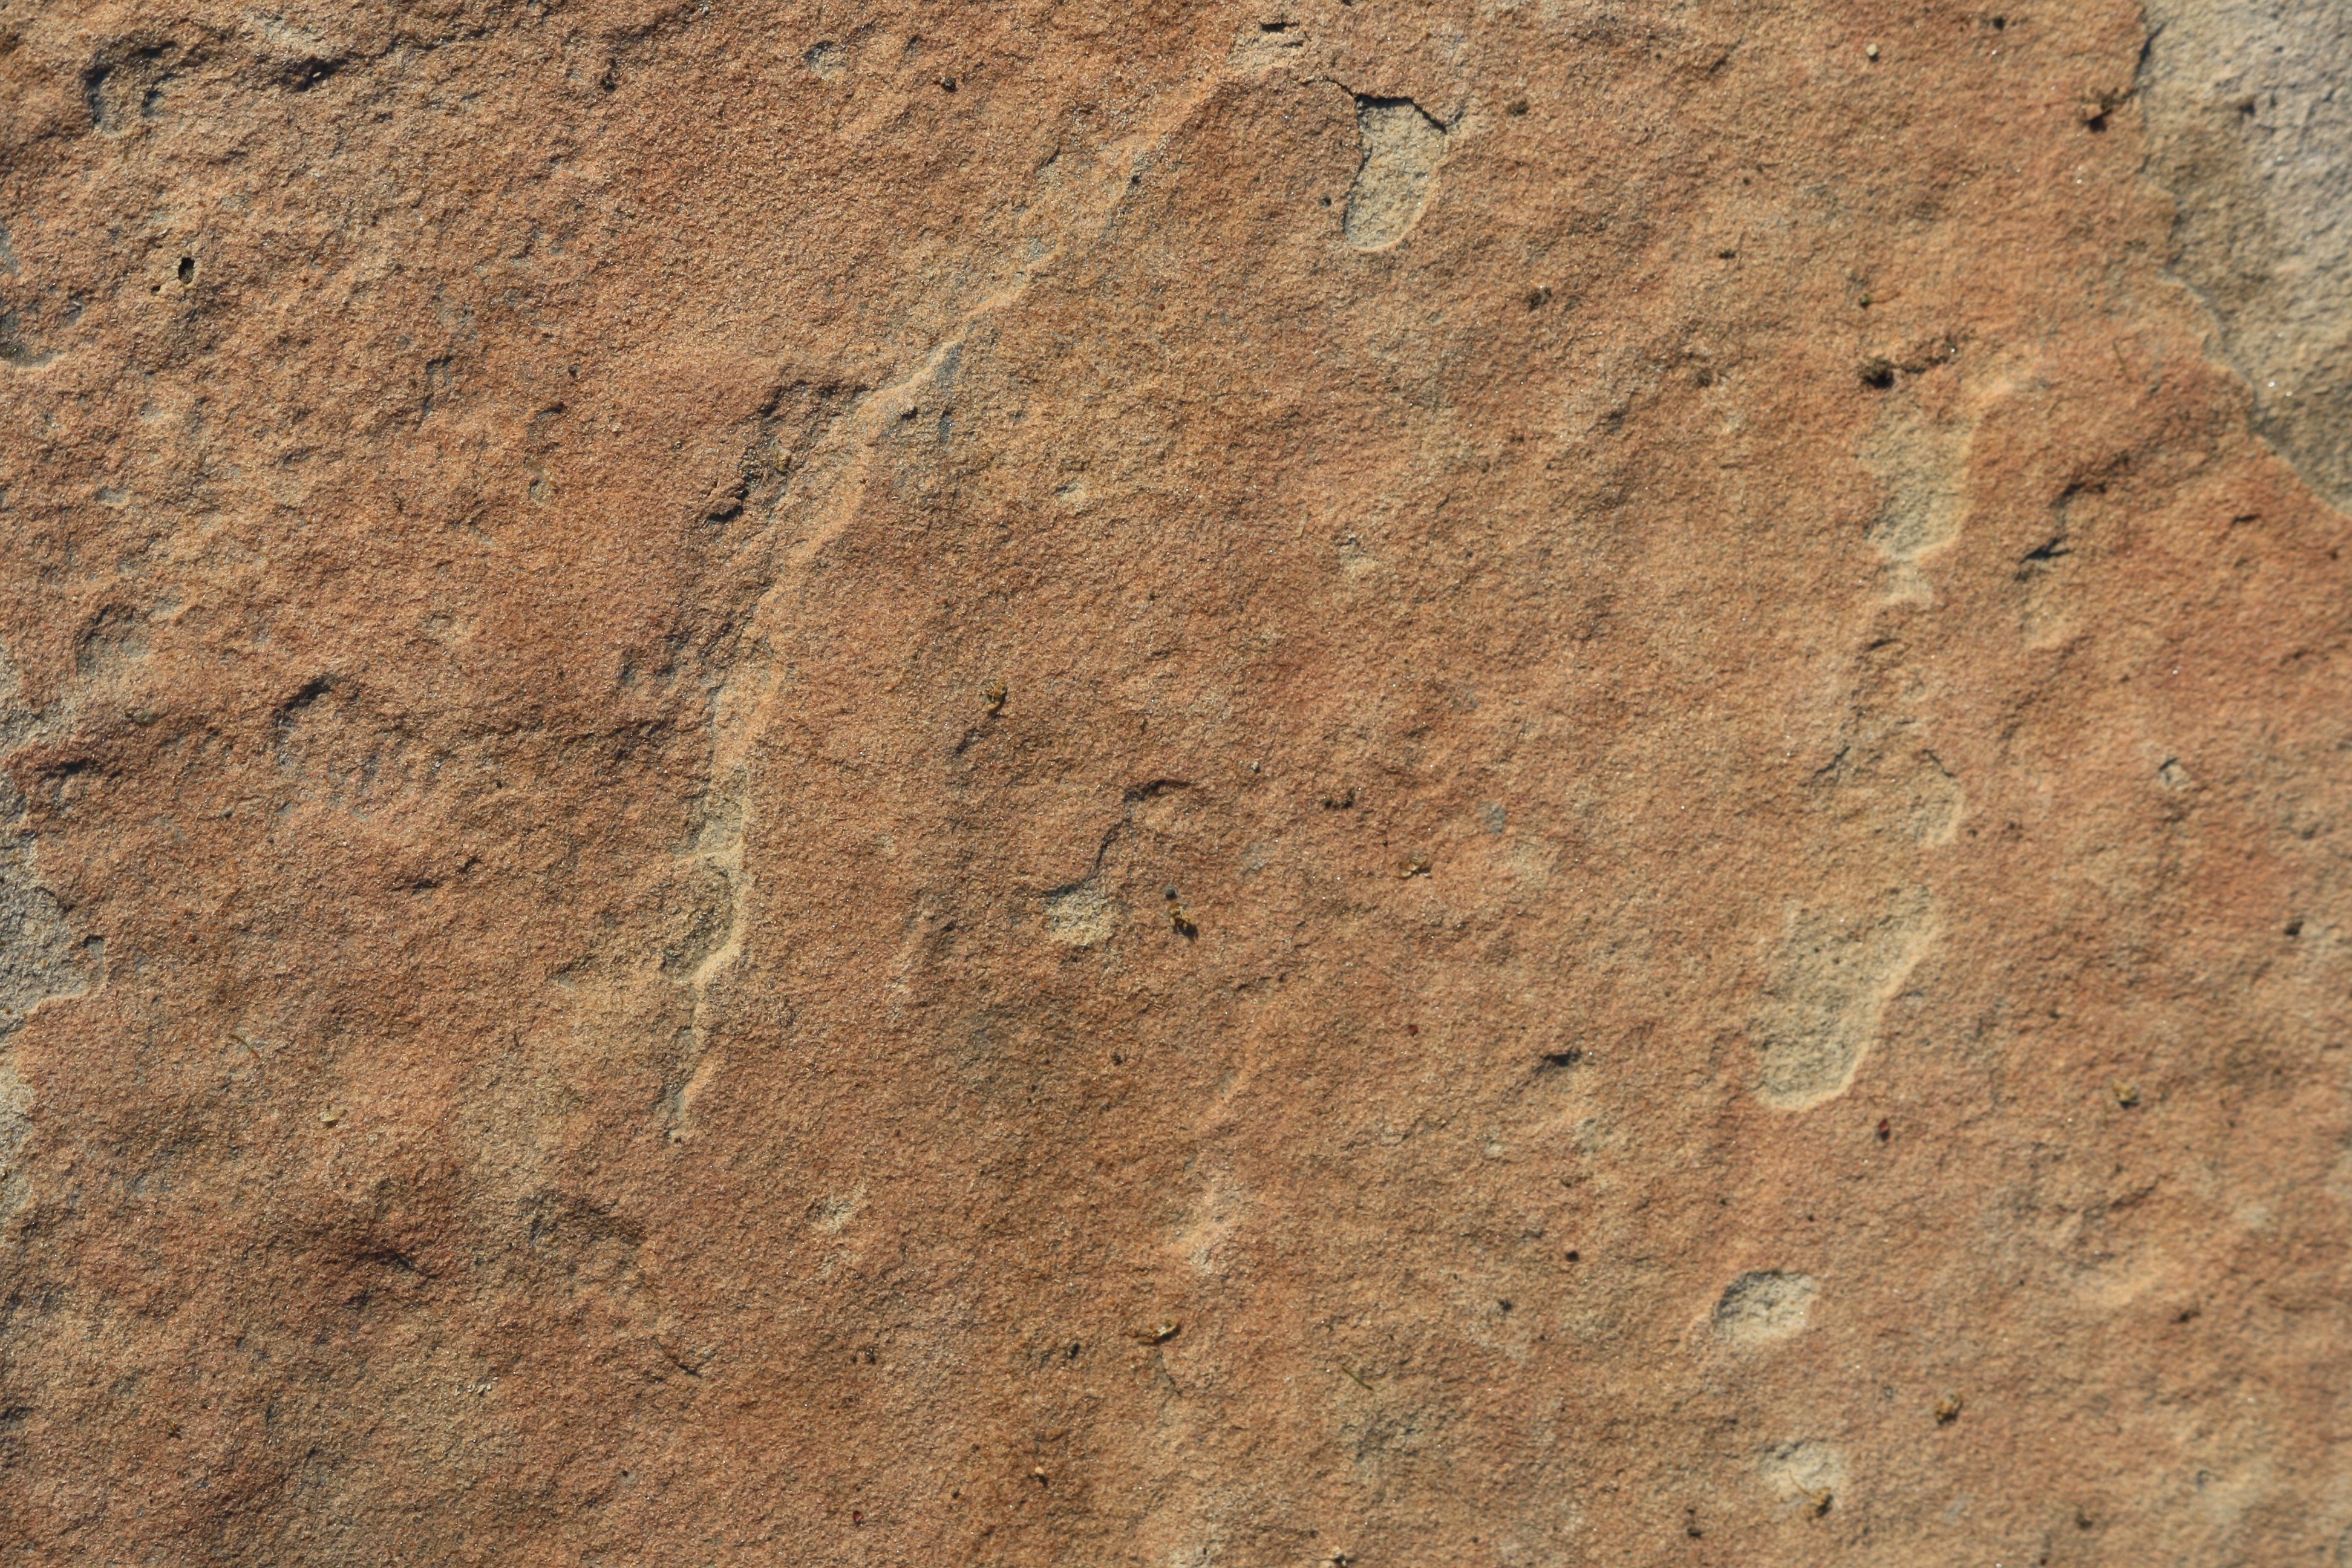 Sandstone Rock Texture   Free High Resolution Photo   Dimensions 3888